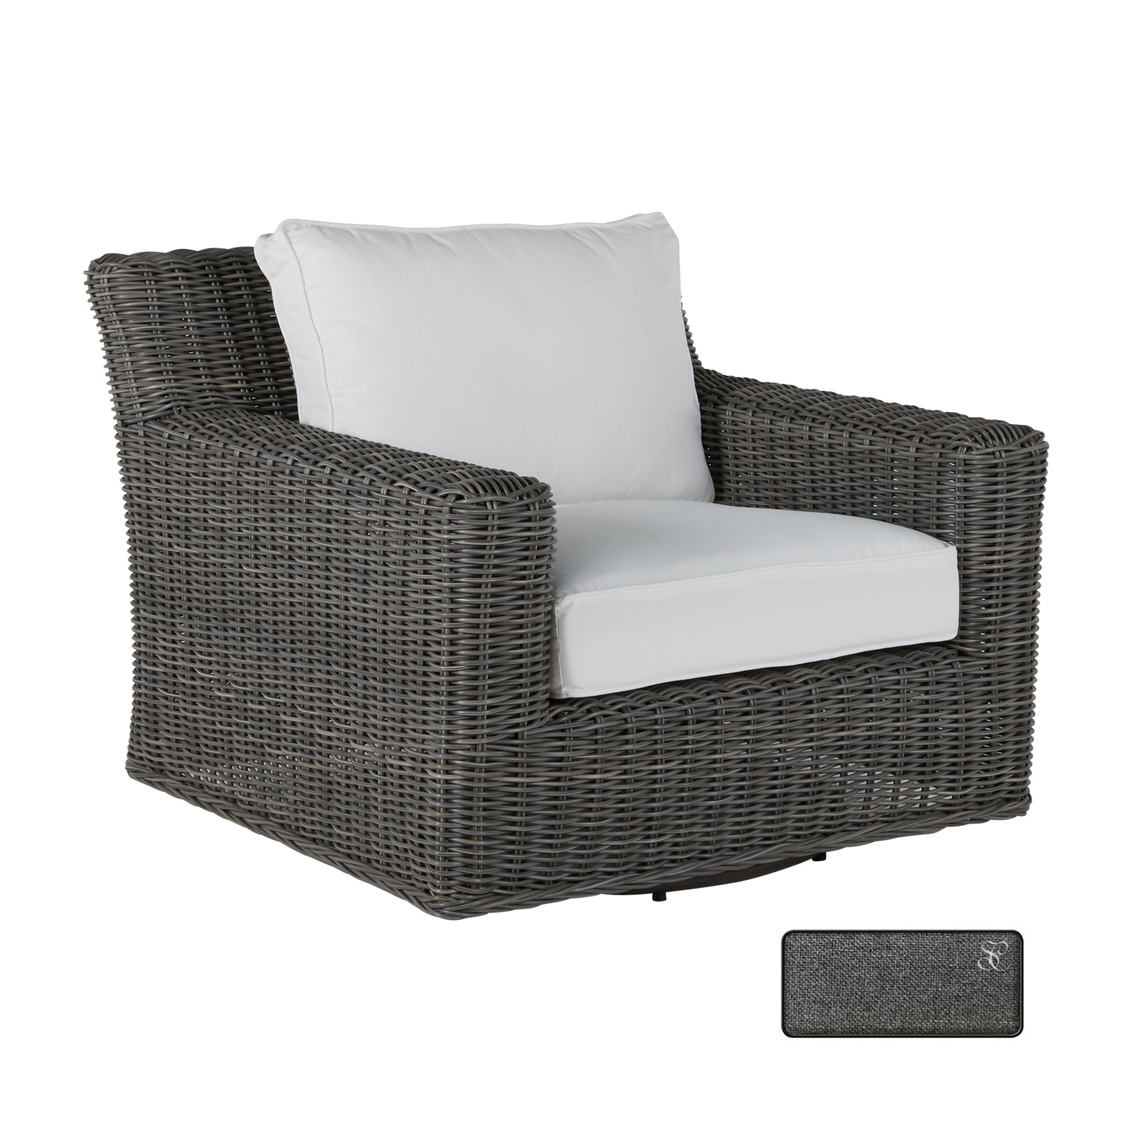 rustic swivel lounge and speaker in slate grey – bluetooth speaker – frame only product image